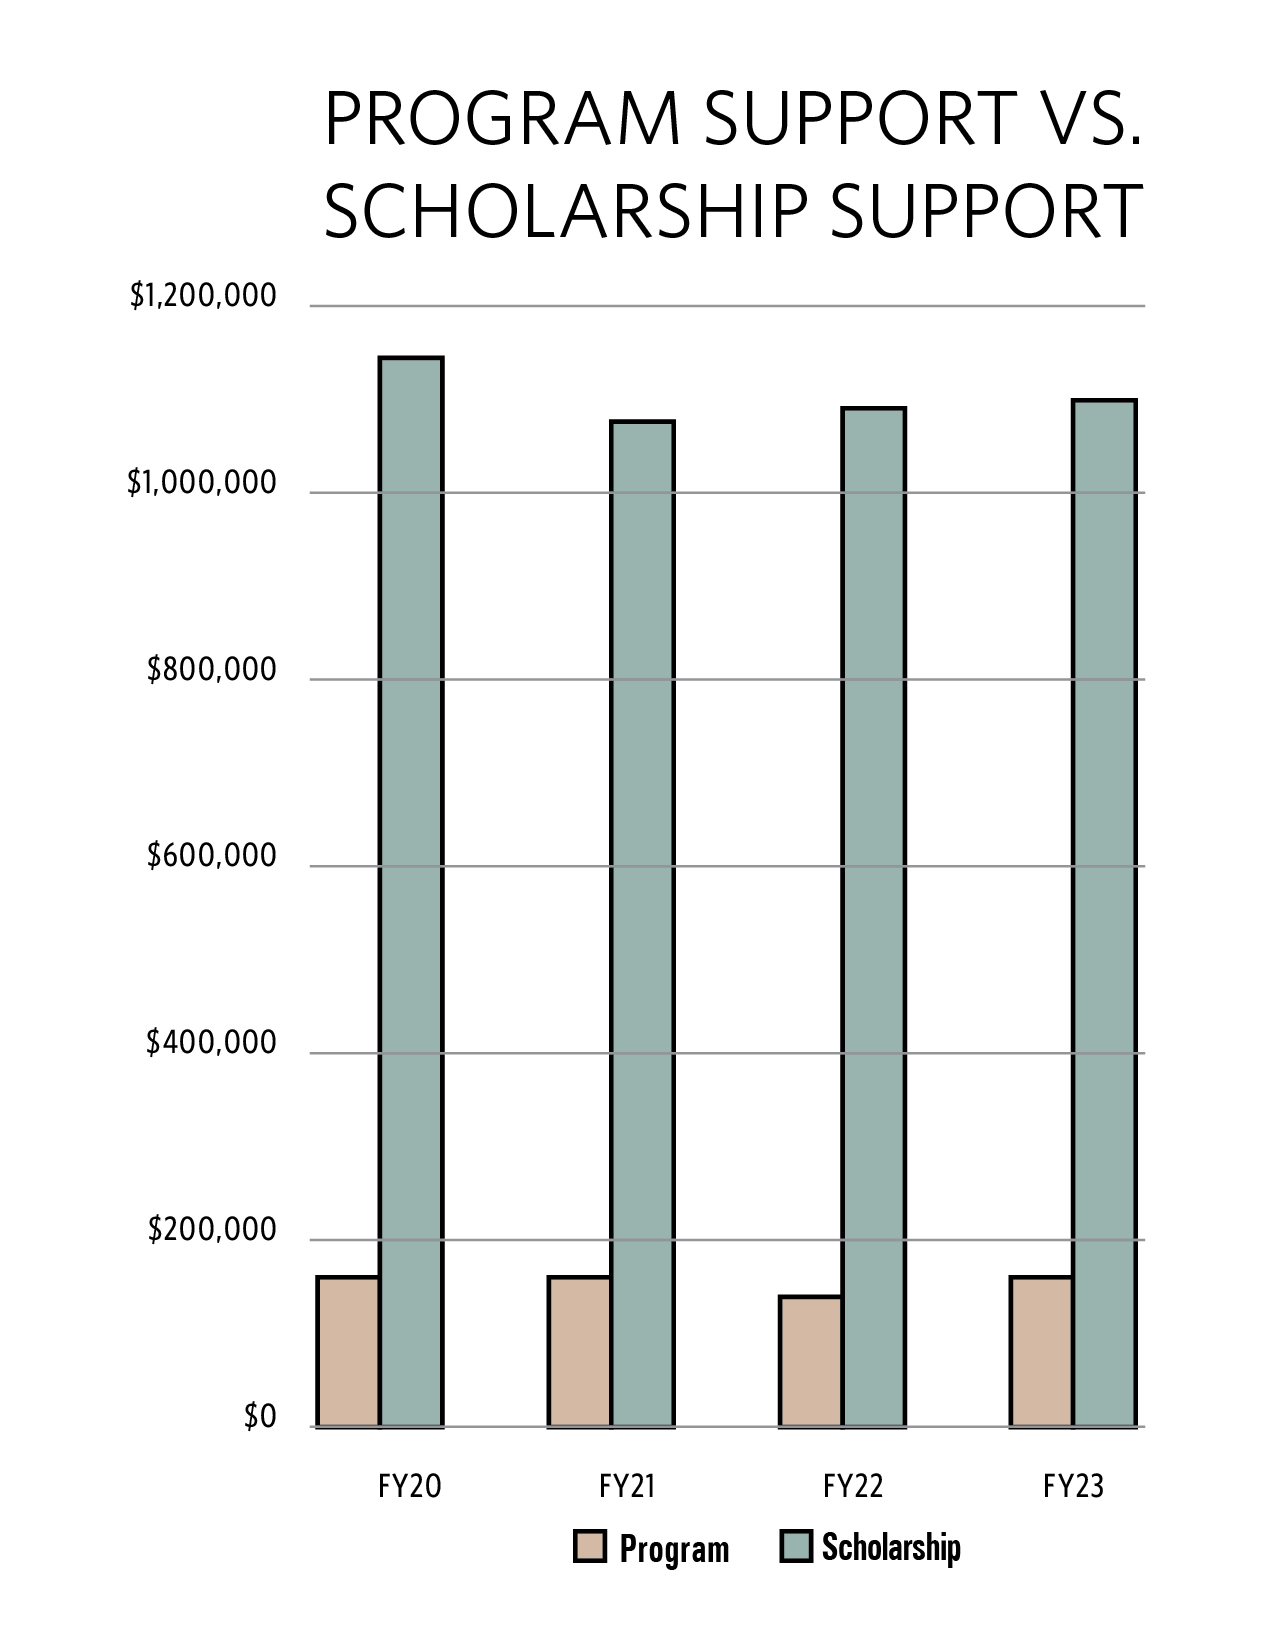 A graph describing the program and scholarship support over time from 2020 to 2023. It decreased in 2021 but has been on the rise since then. Current the scholarship amount is at about 1.2 million dollars and the Program support is at about 170,000 dollars